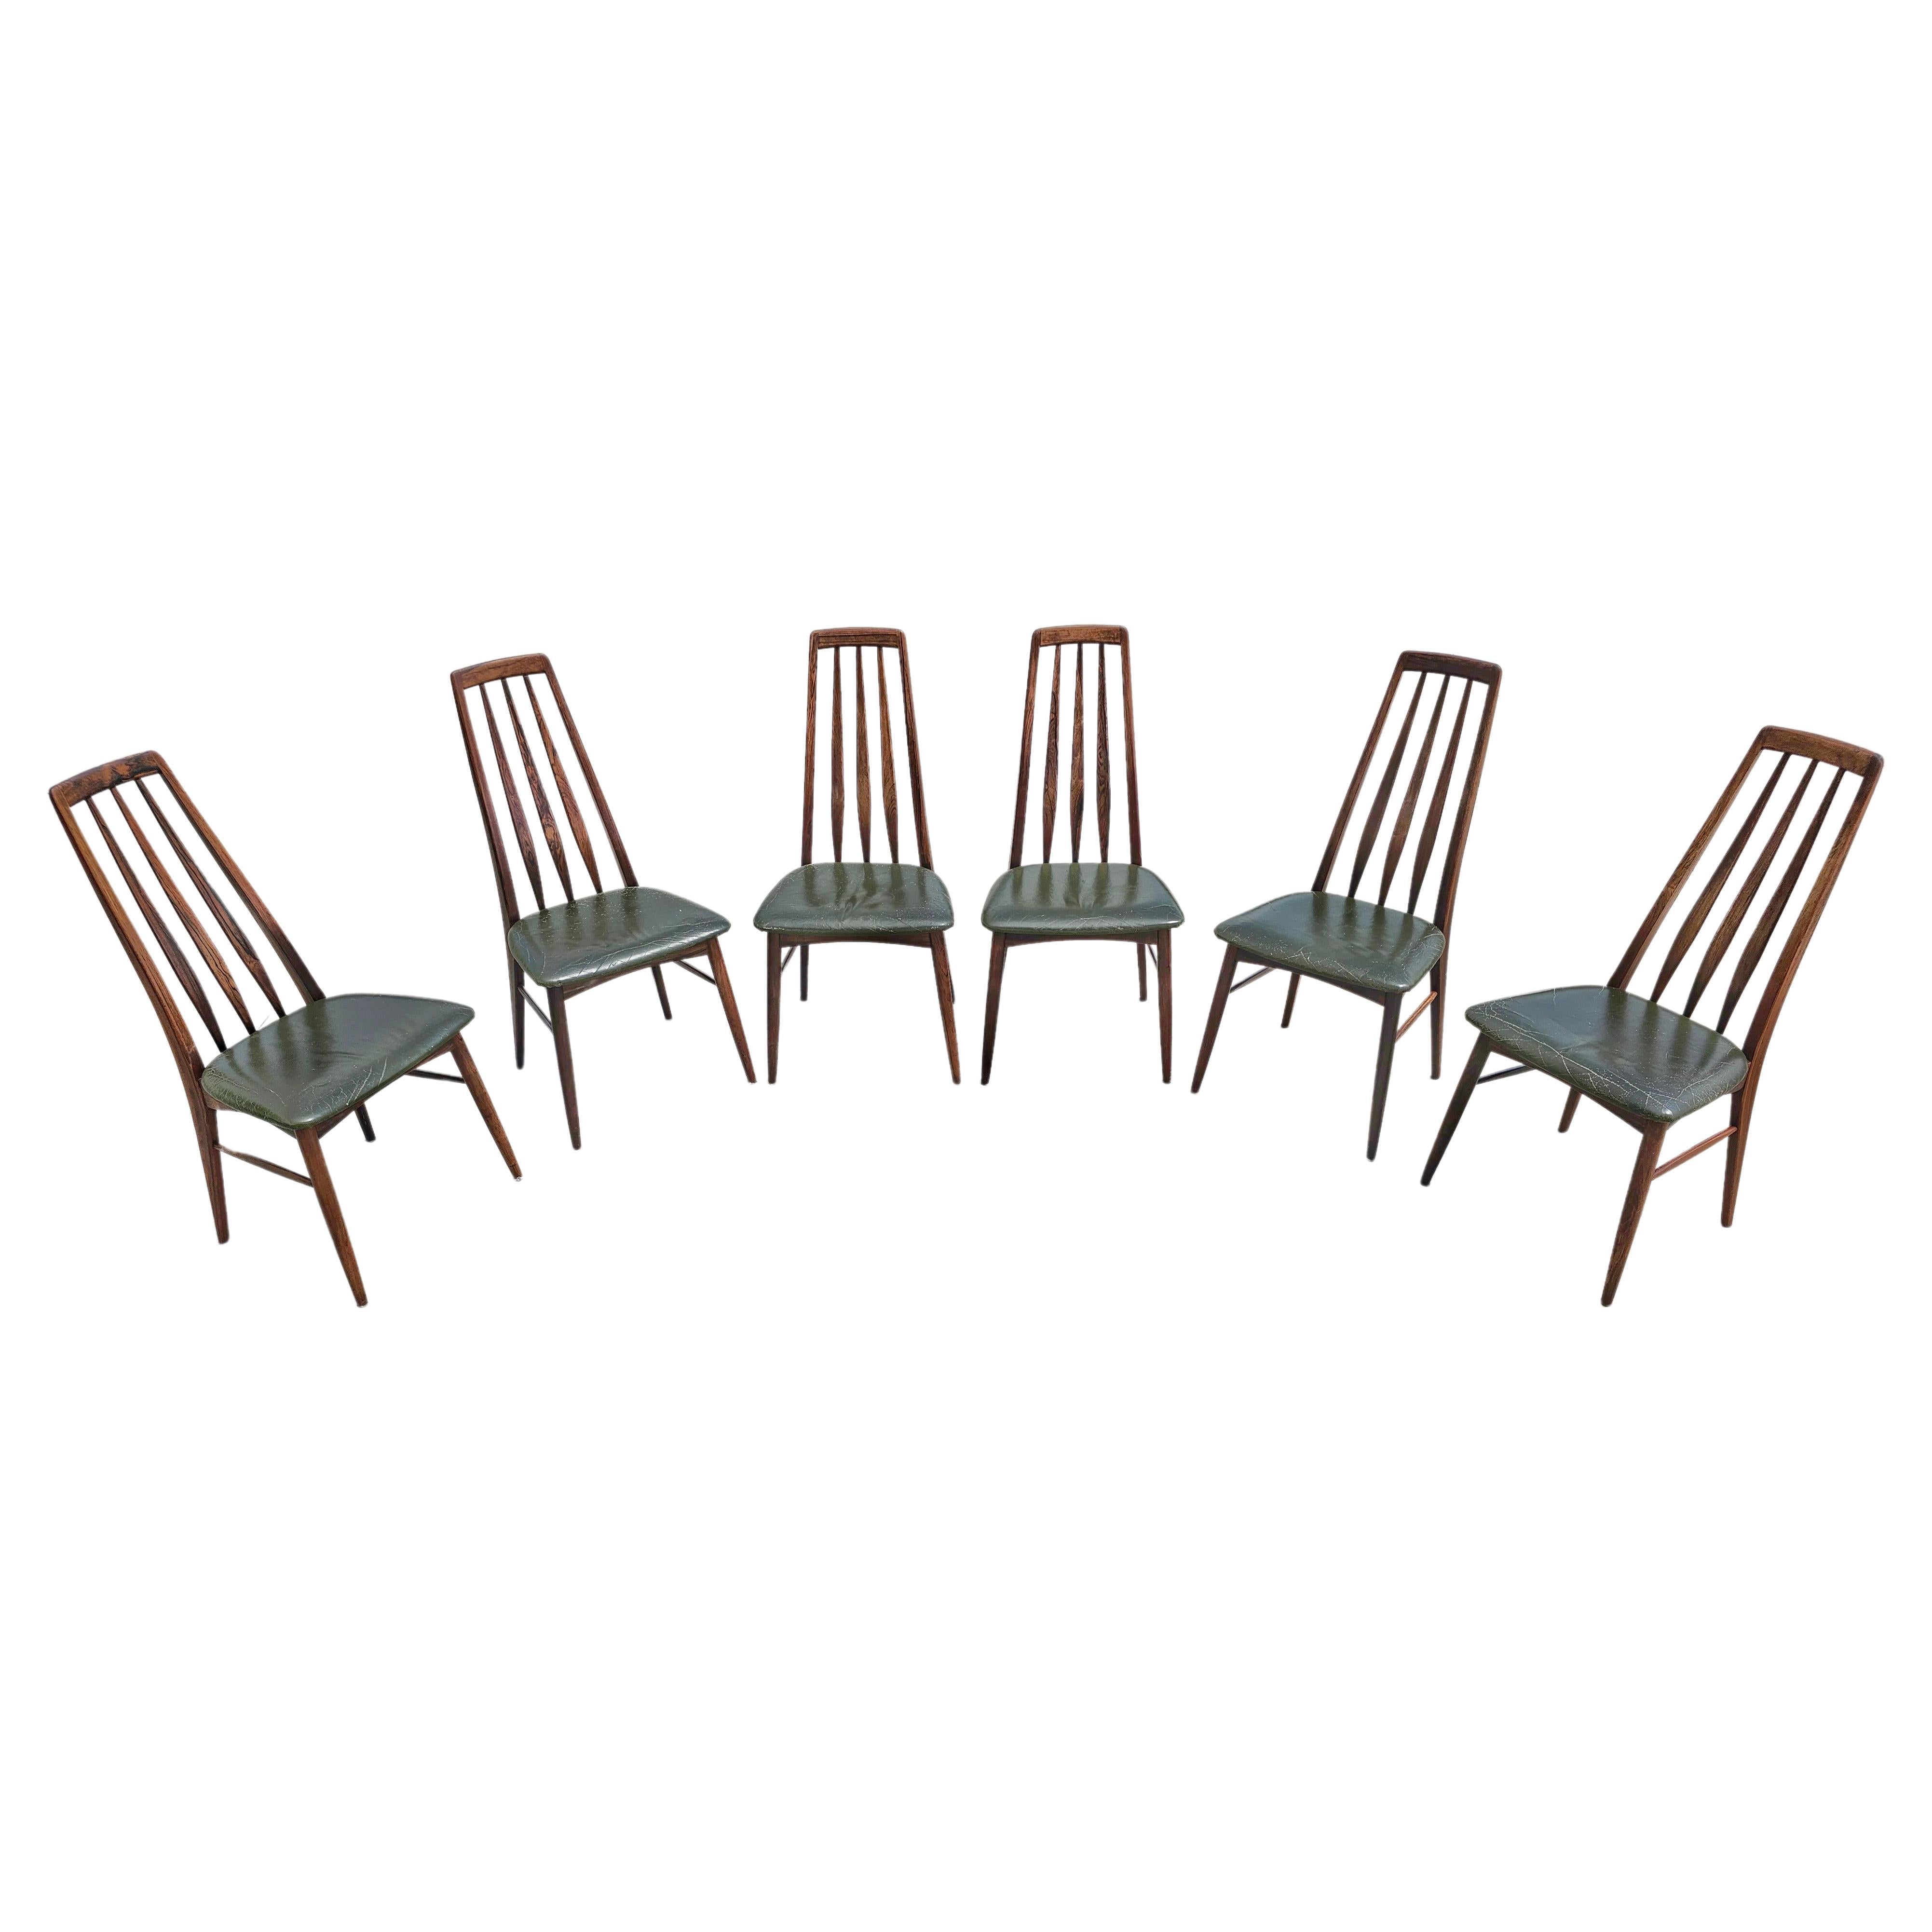 Set of 6 Eva Chairs done in Rosewood designed by Niels Koefoed, Denmark 1960s